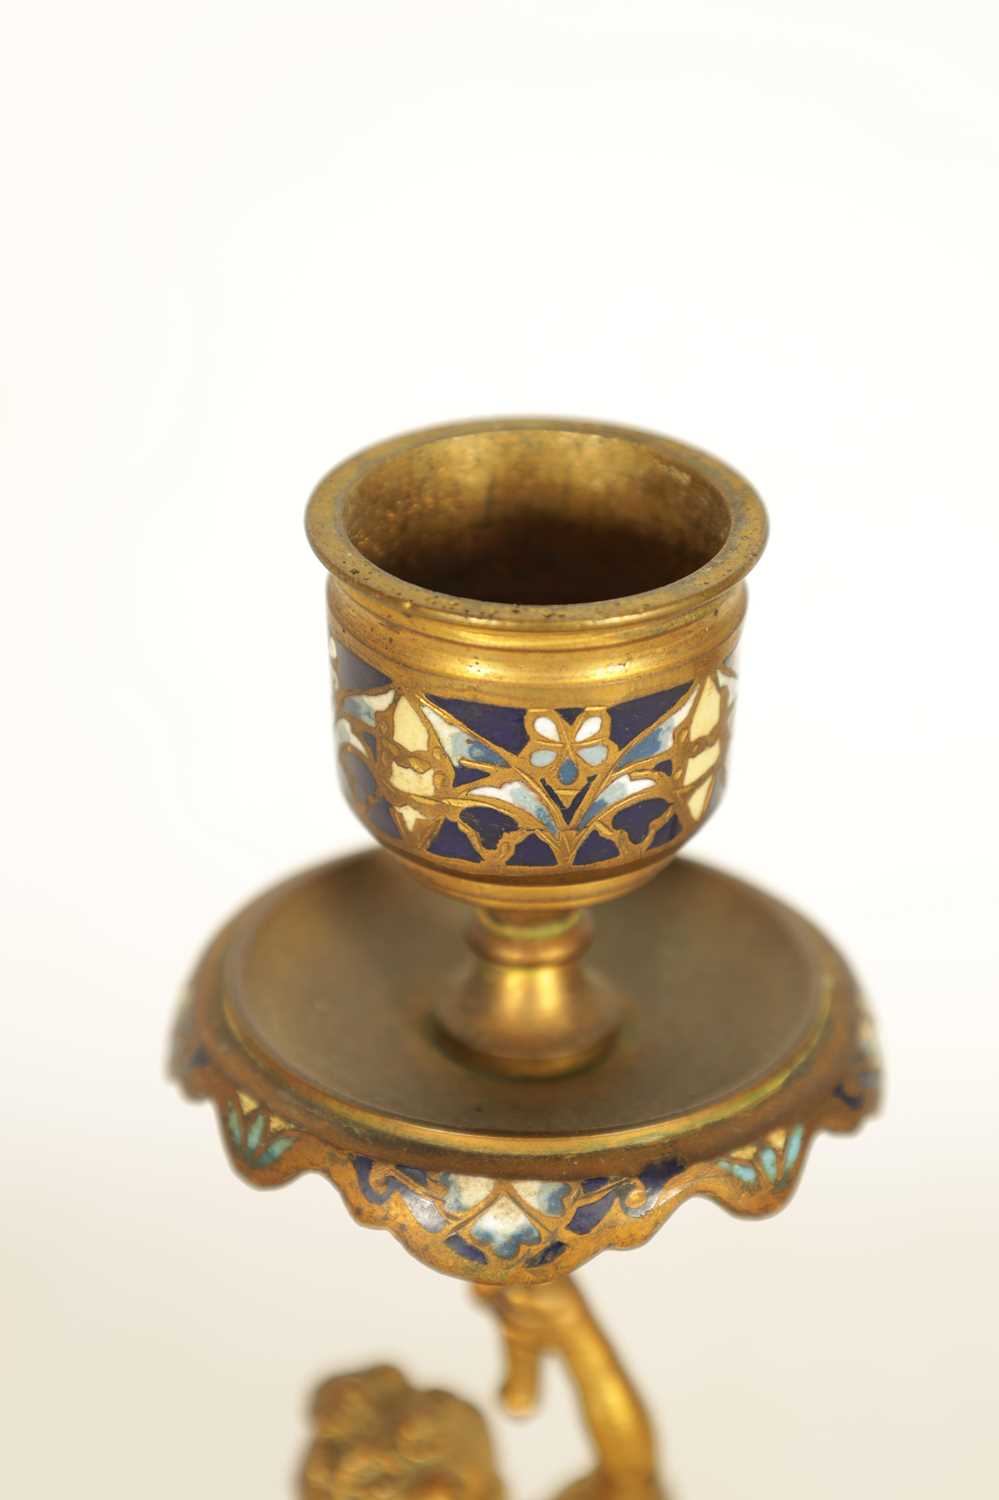 A PAIR OF 19TH CENTURY FRENCH FIGURAL GILT BRONZE AND CHAMPLEVE ENAMEL CANDLESTICKS - Image 3 of 9